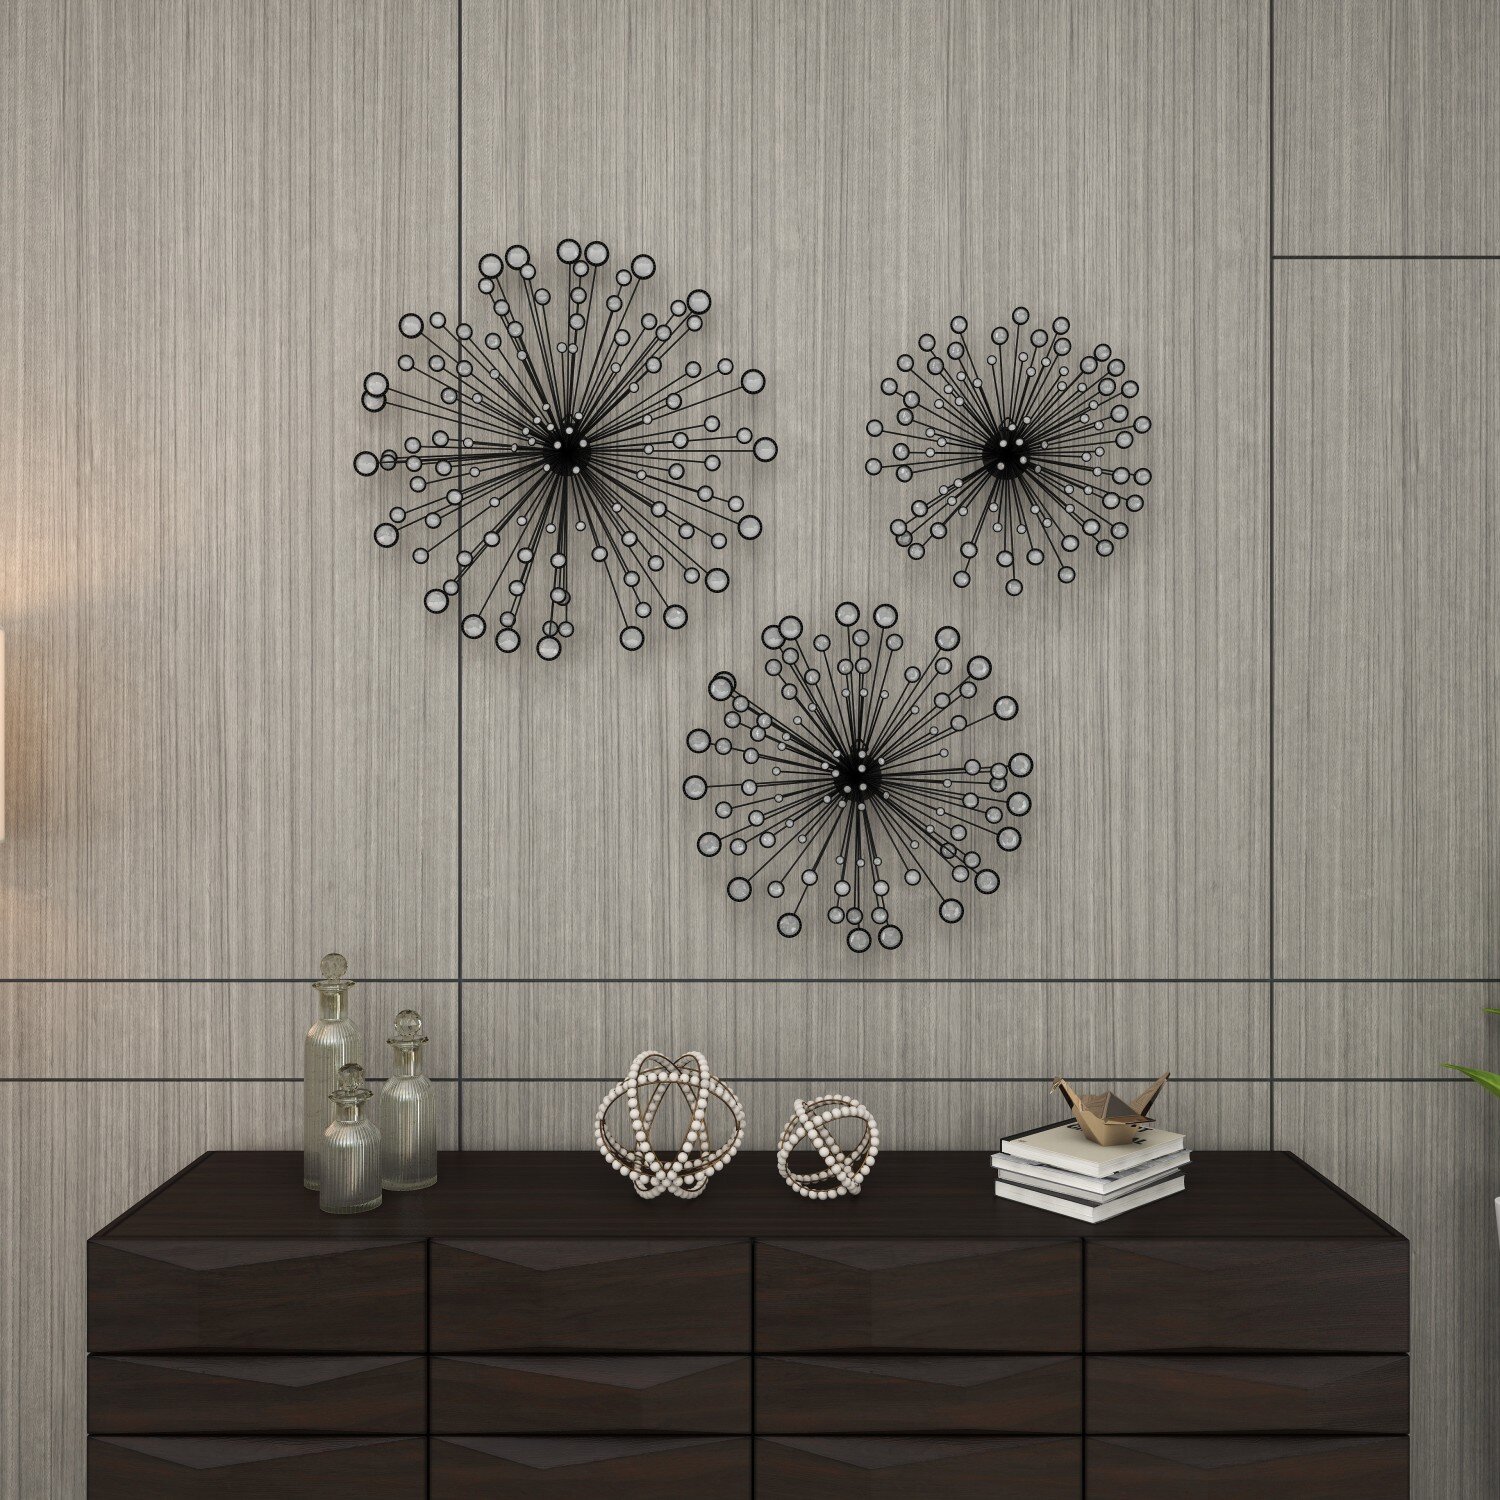 DecMode Black Metal Starburst Wall Decor with Crystal Embellishments (3  Count) 